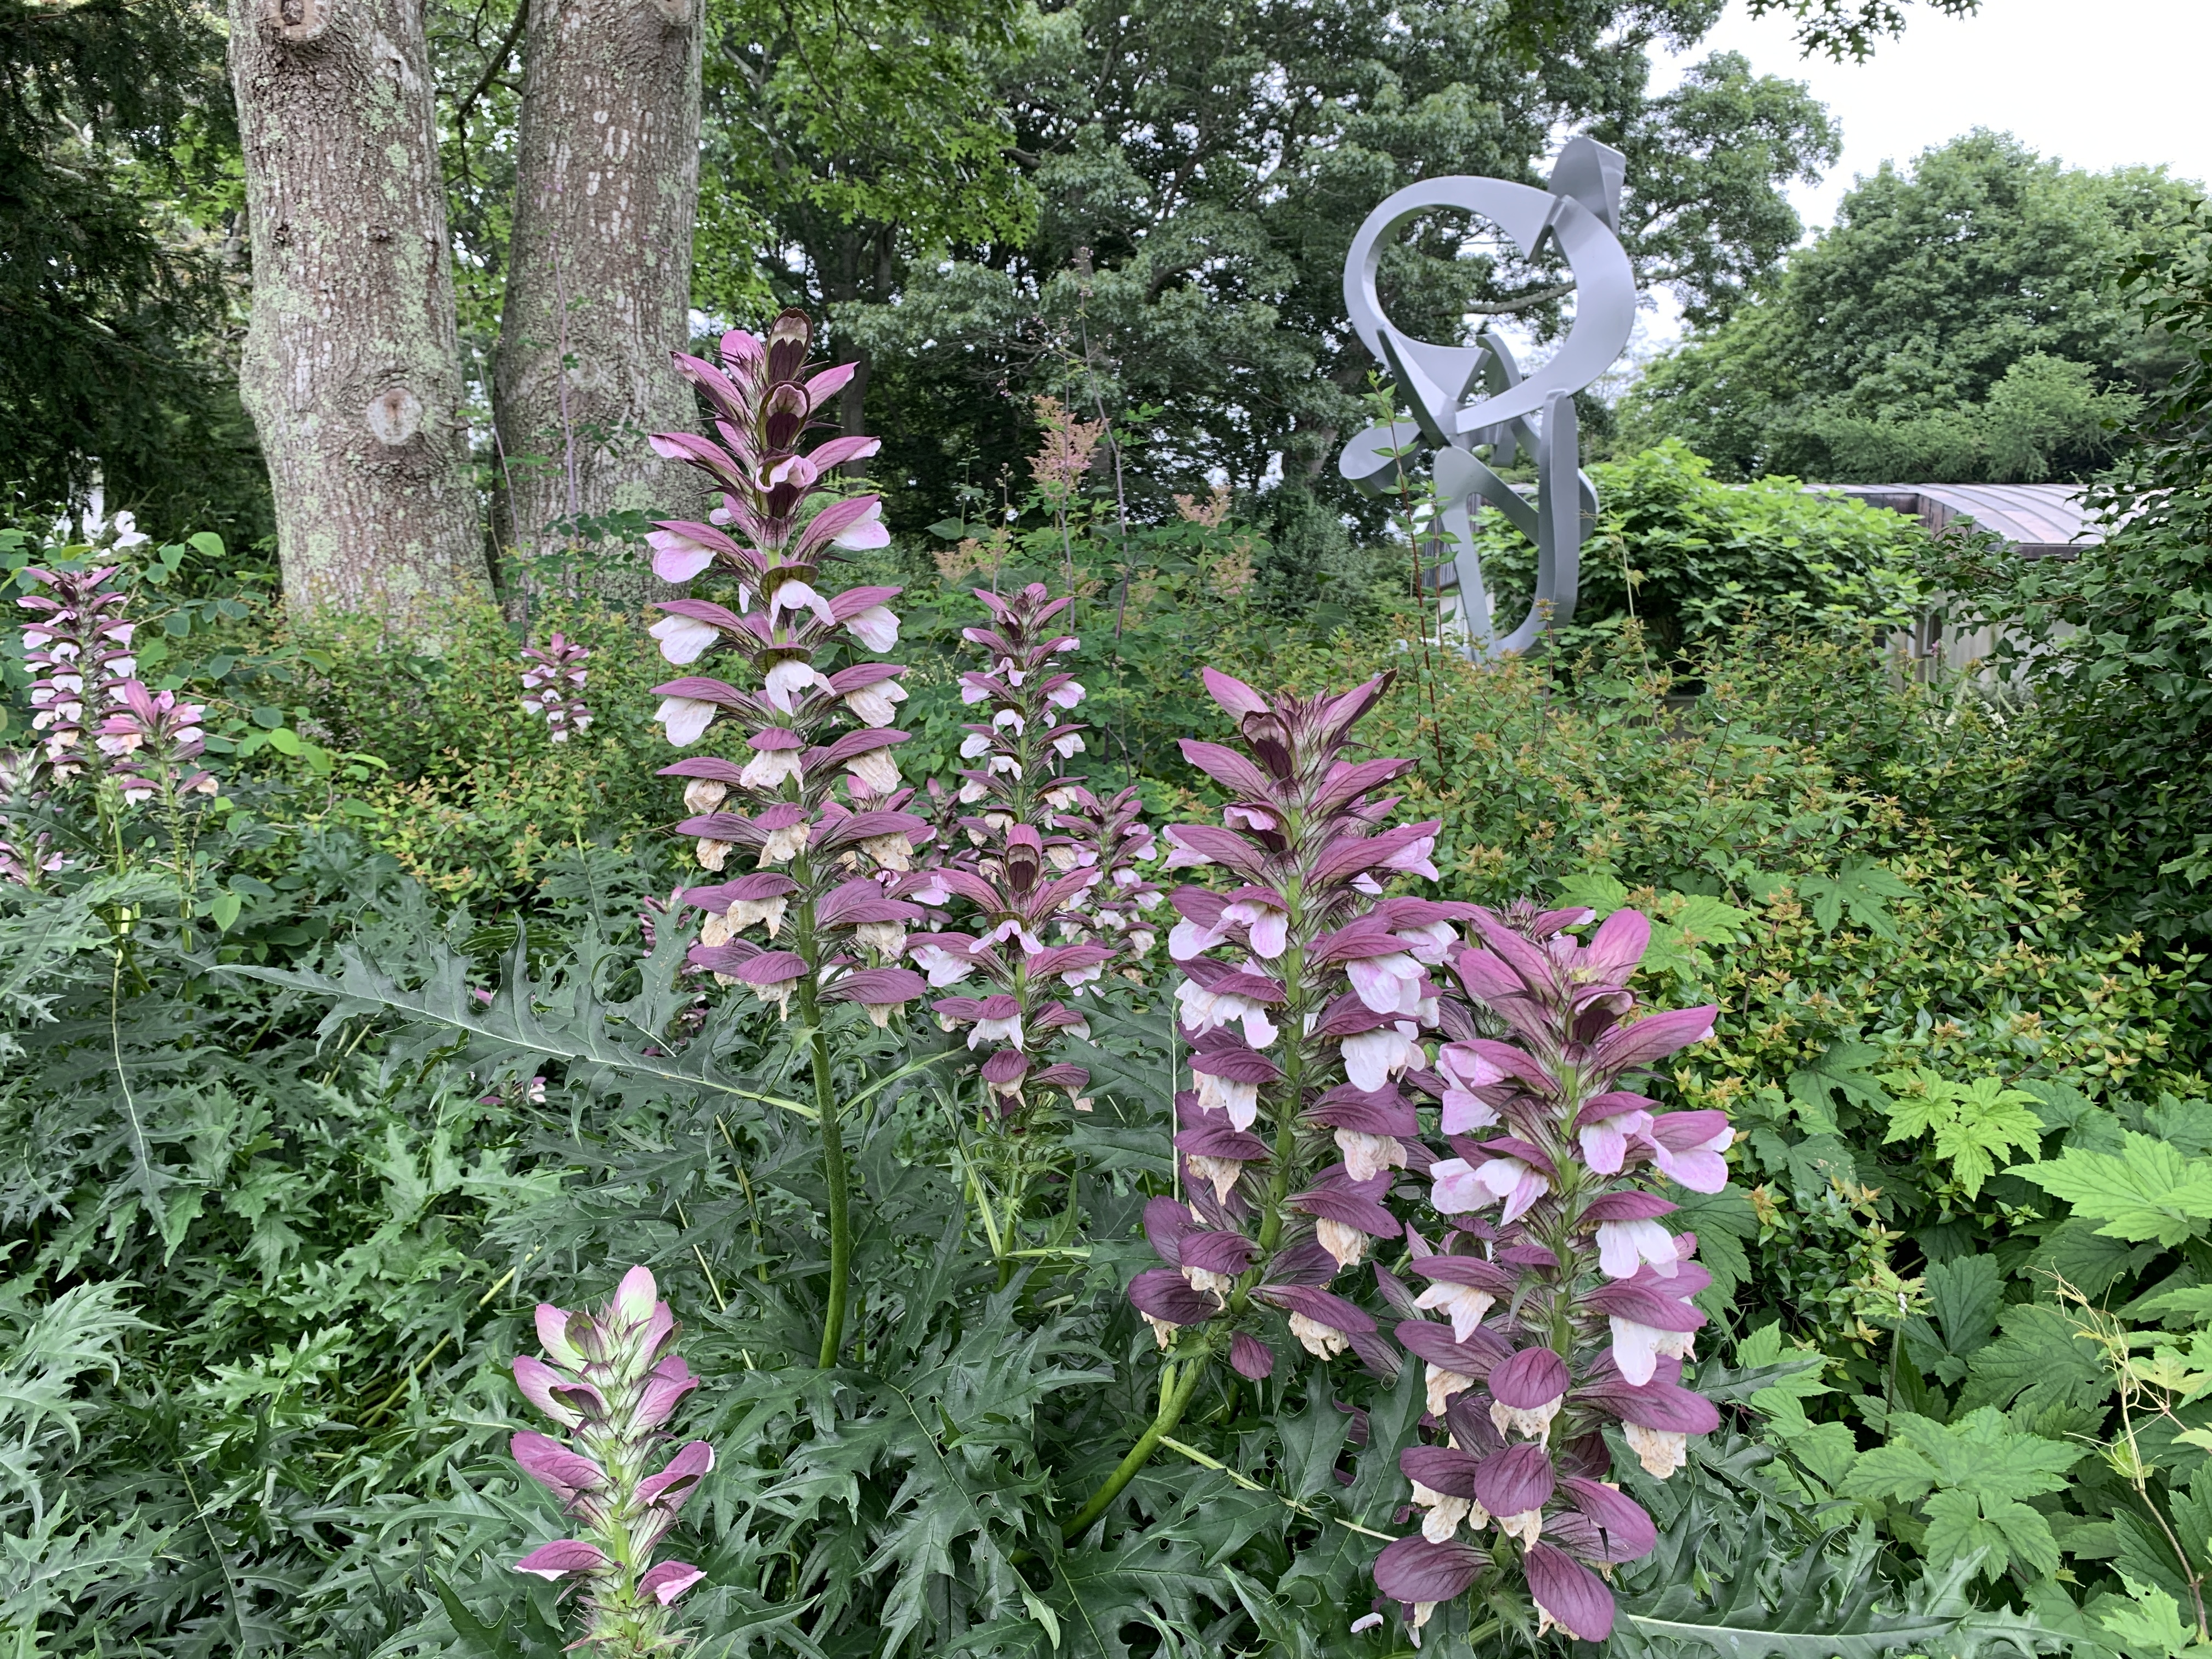 Acanthus blossoms frame a sculpture by Kevin Barrett